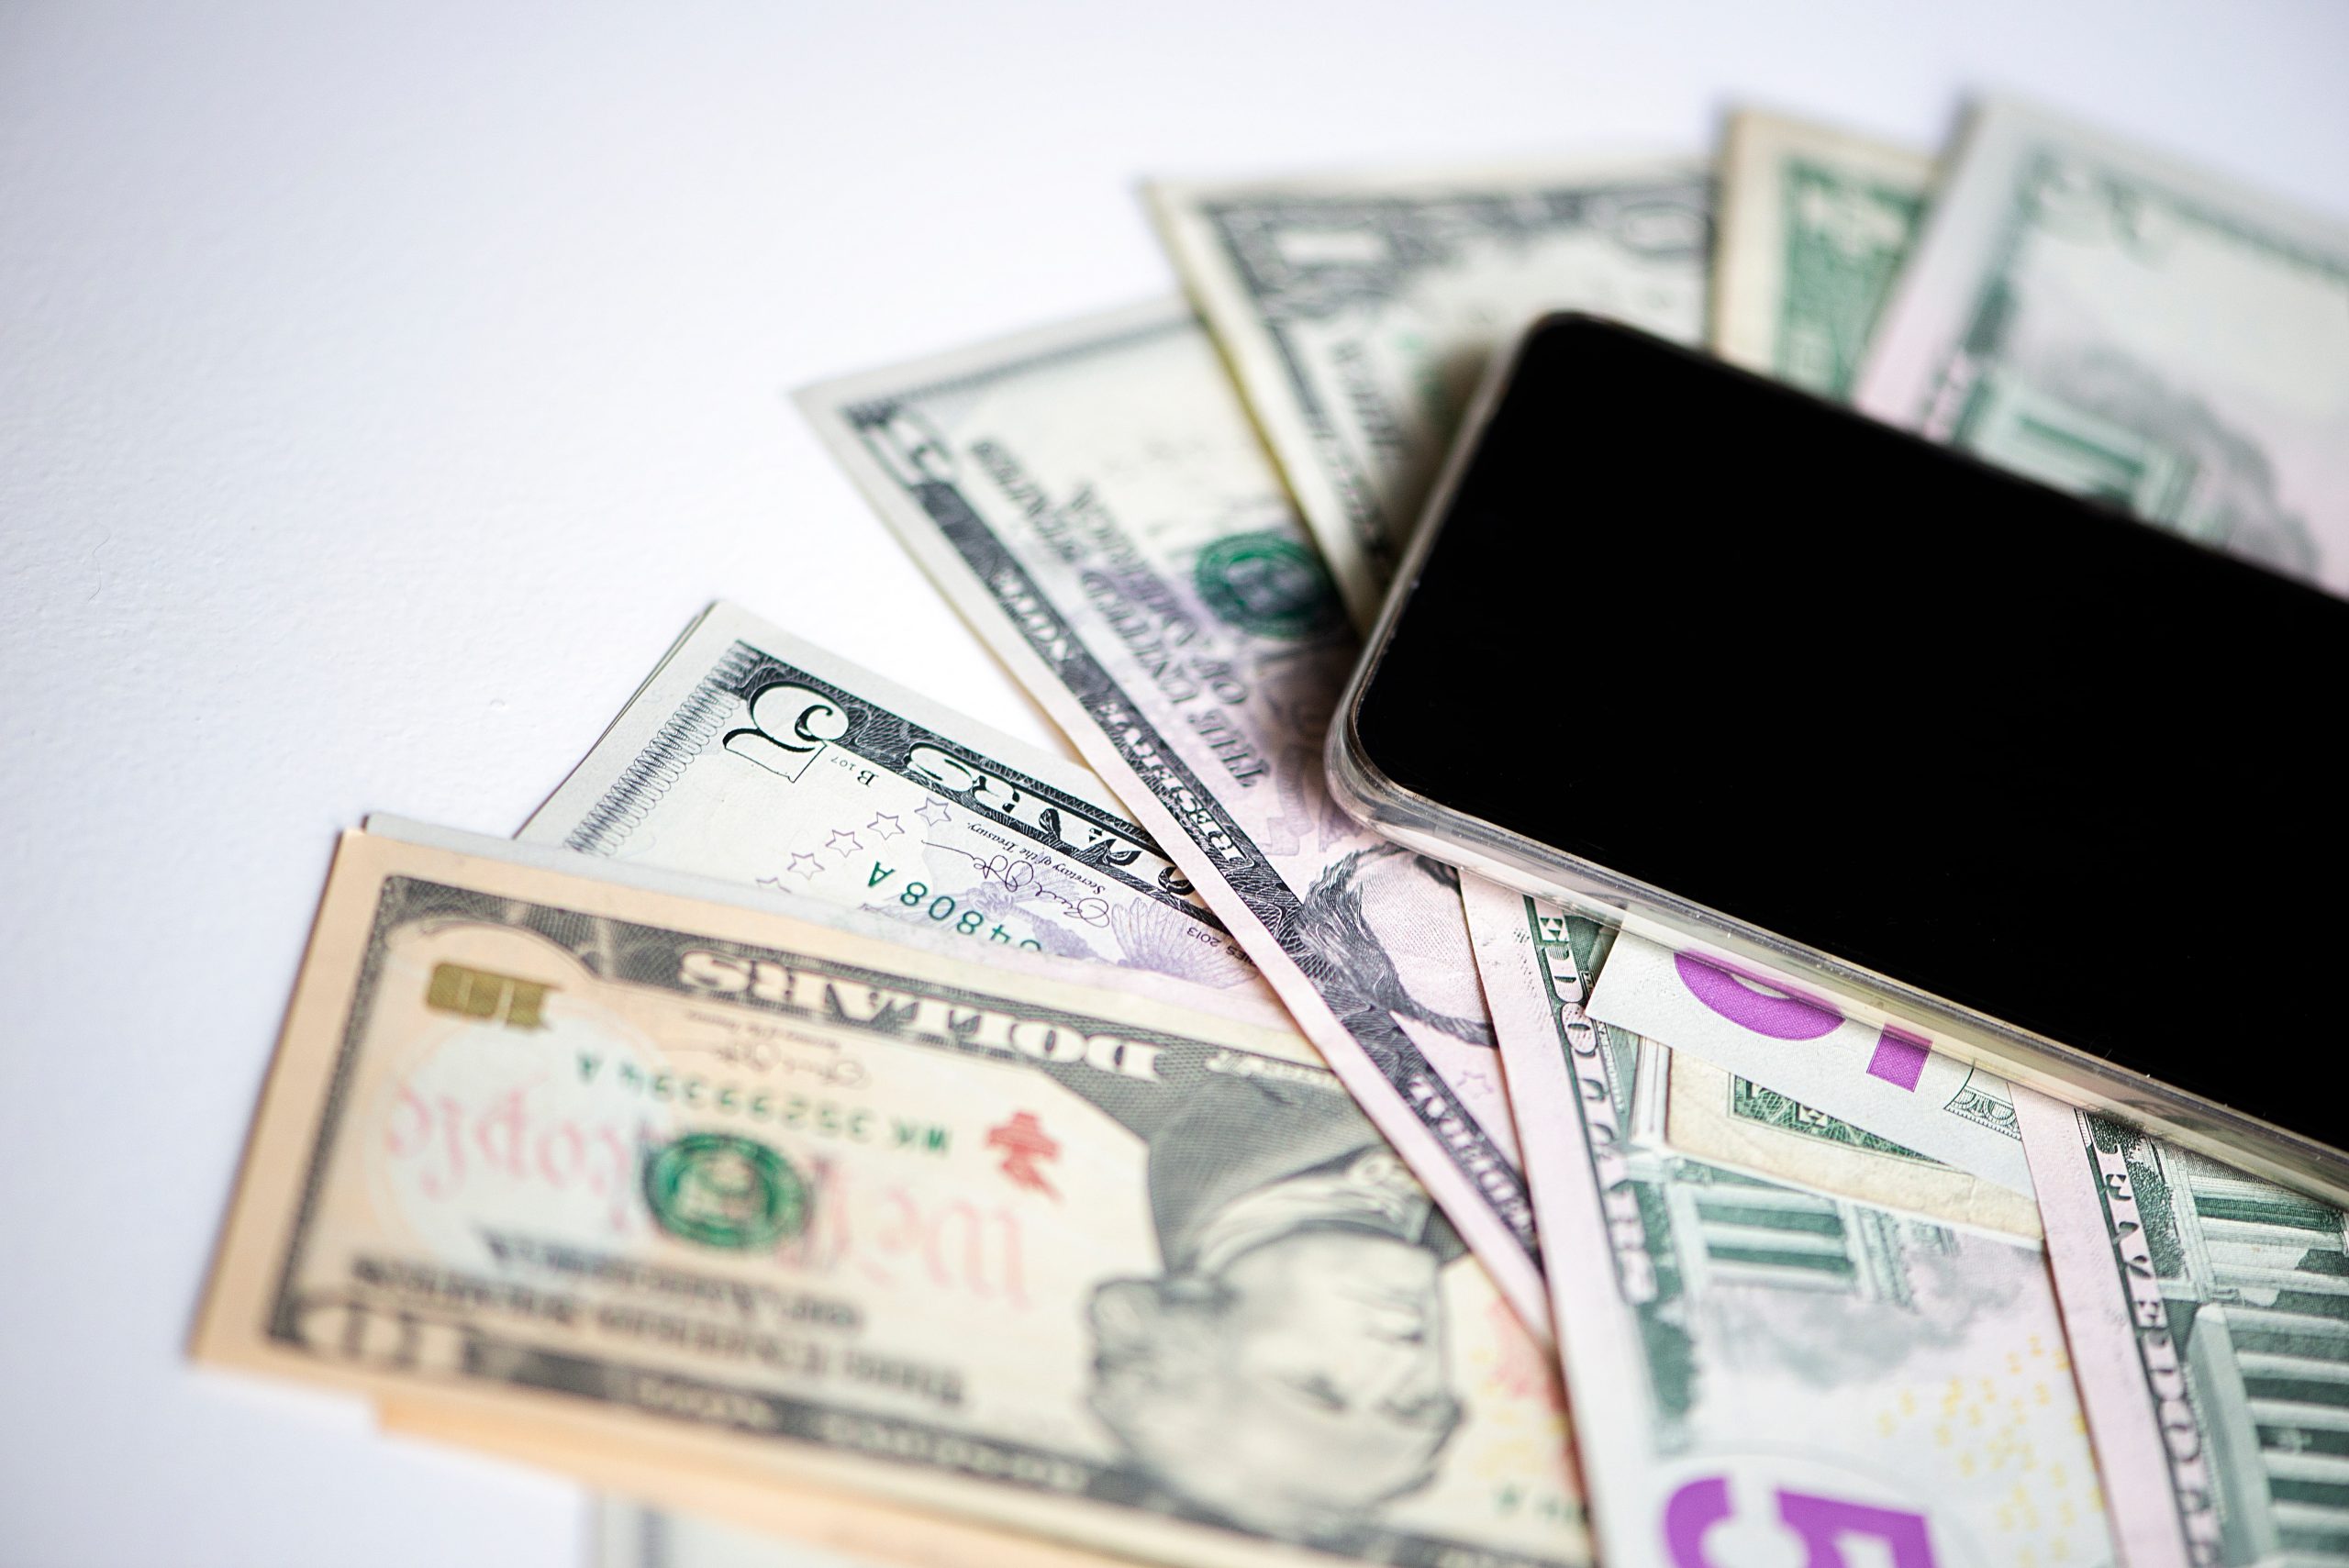 Cash Yor Your iPhone: How To Sell Your iPhone In Baton Rouge